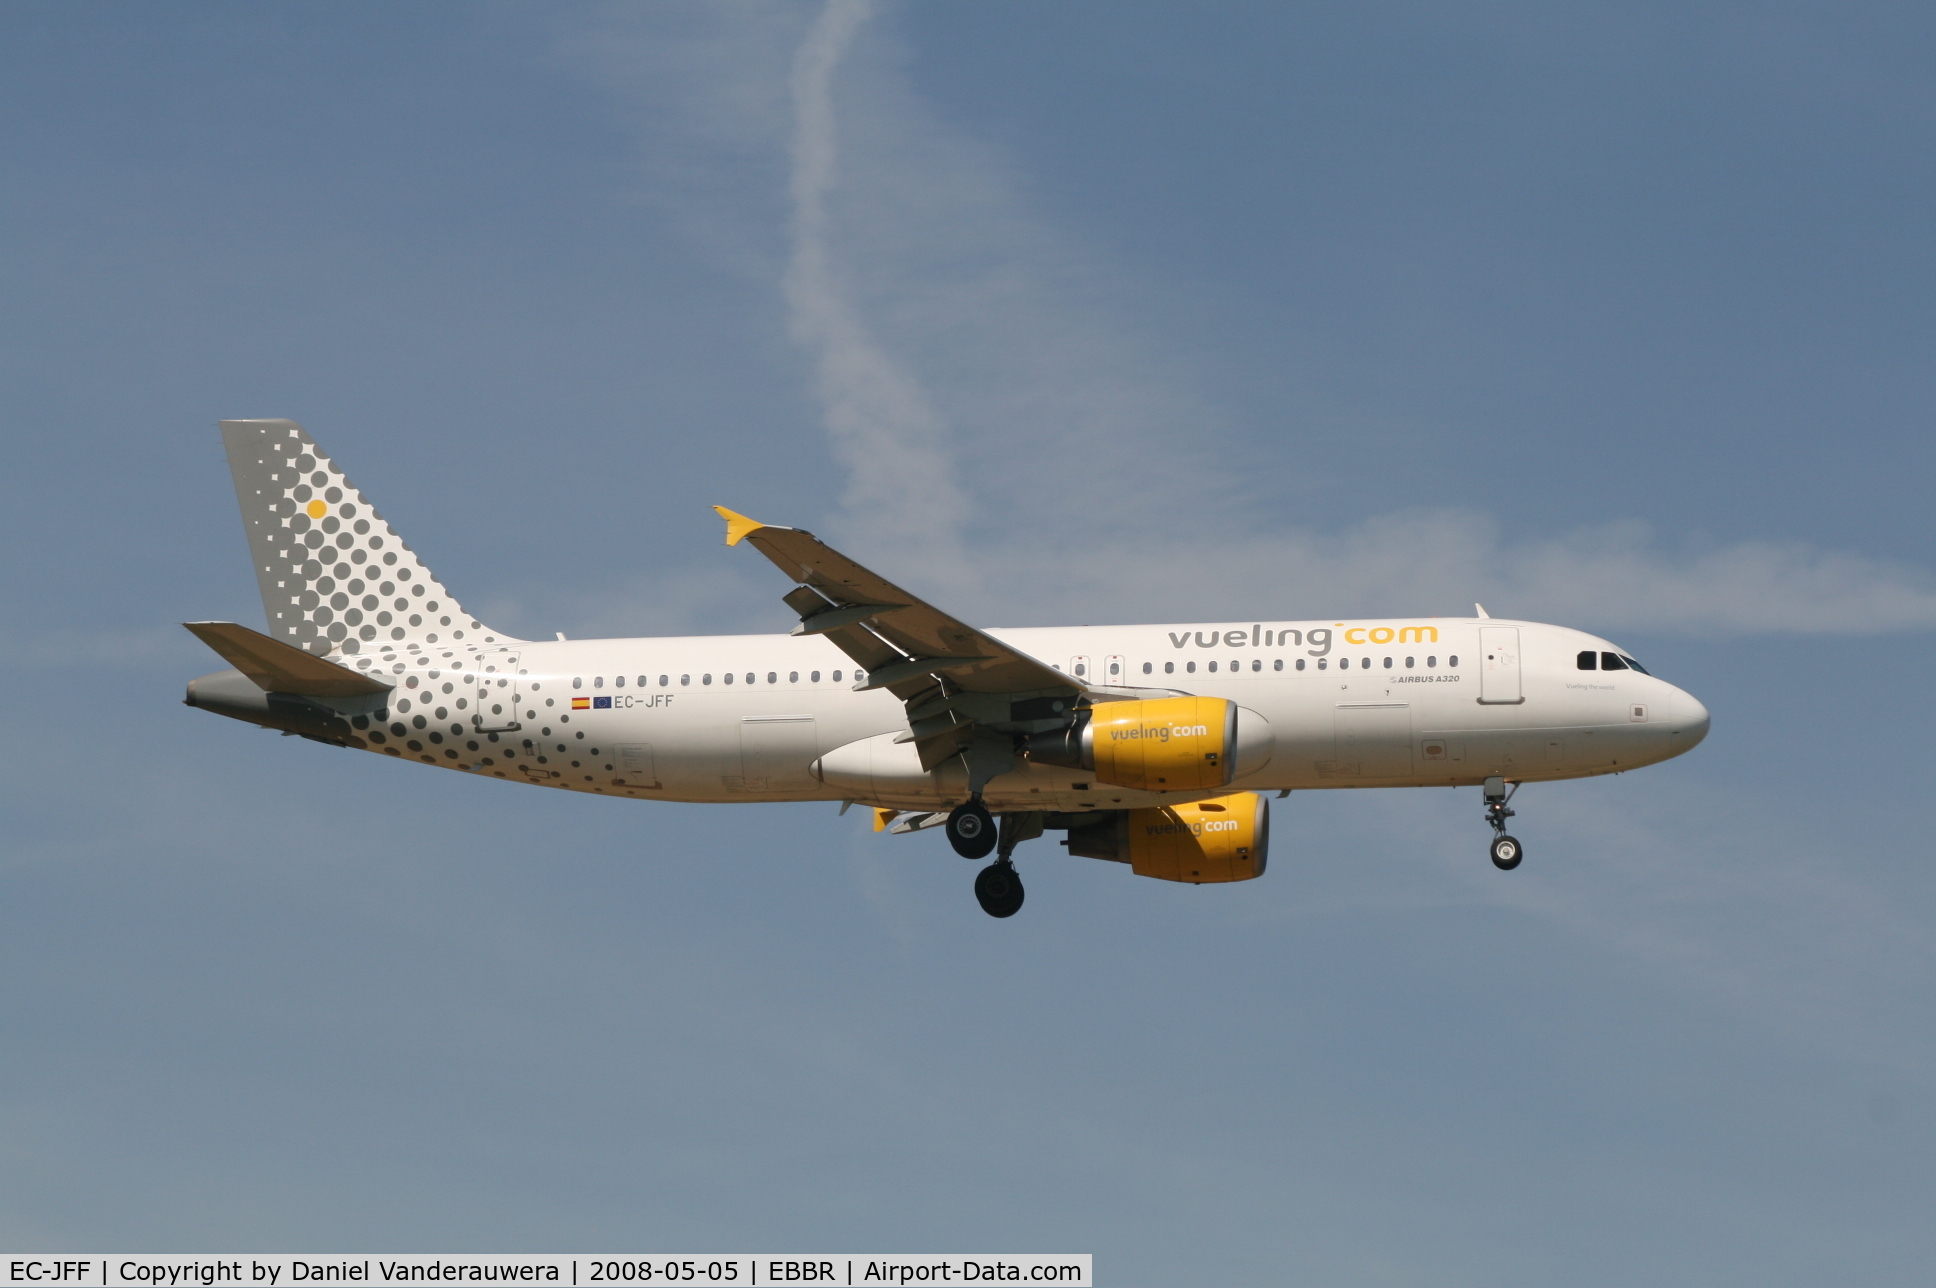 EC-JFF, 2005 Airbus A320-214 C/N 2388, arrival of flight VY7060 to rwy 02